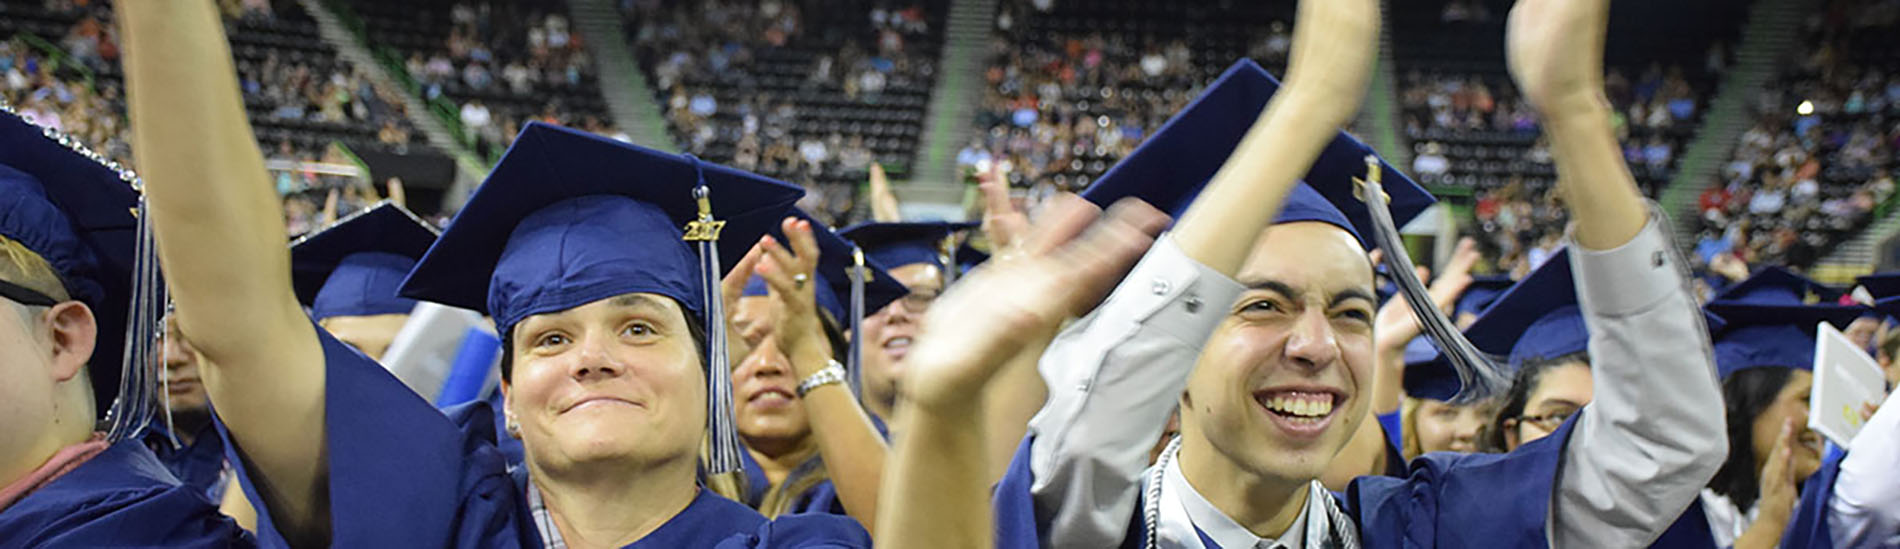 Students celebrate at graduation in their caps and gowns